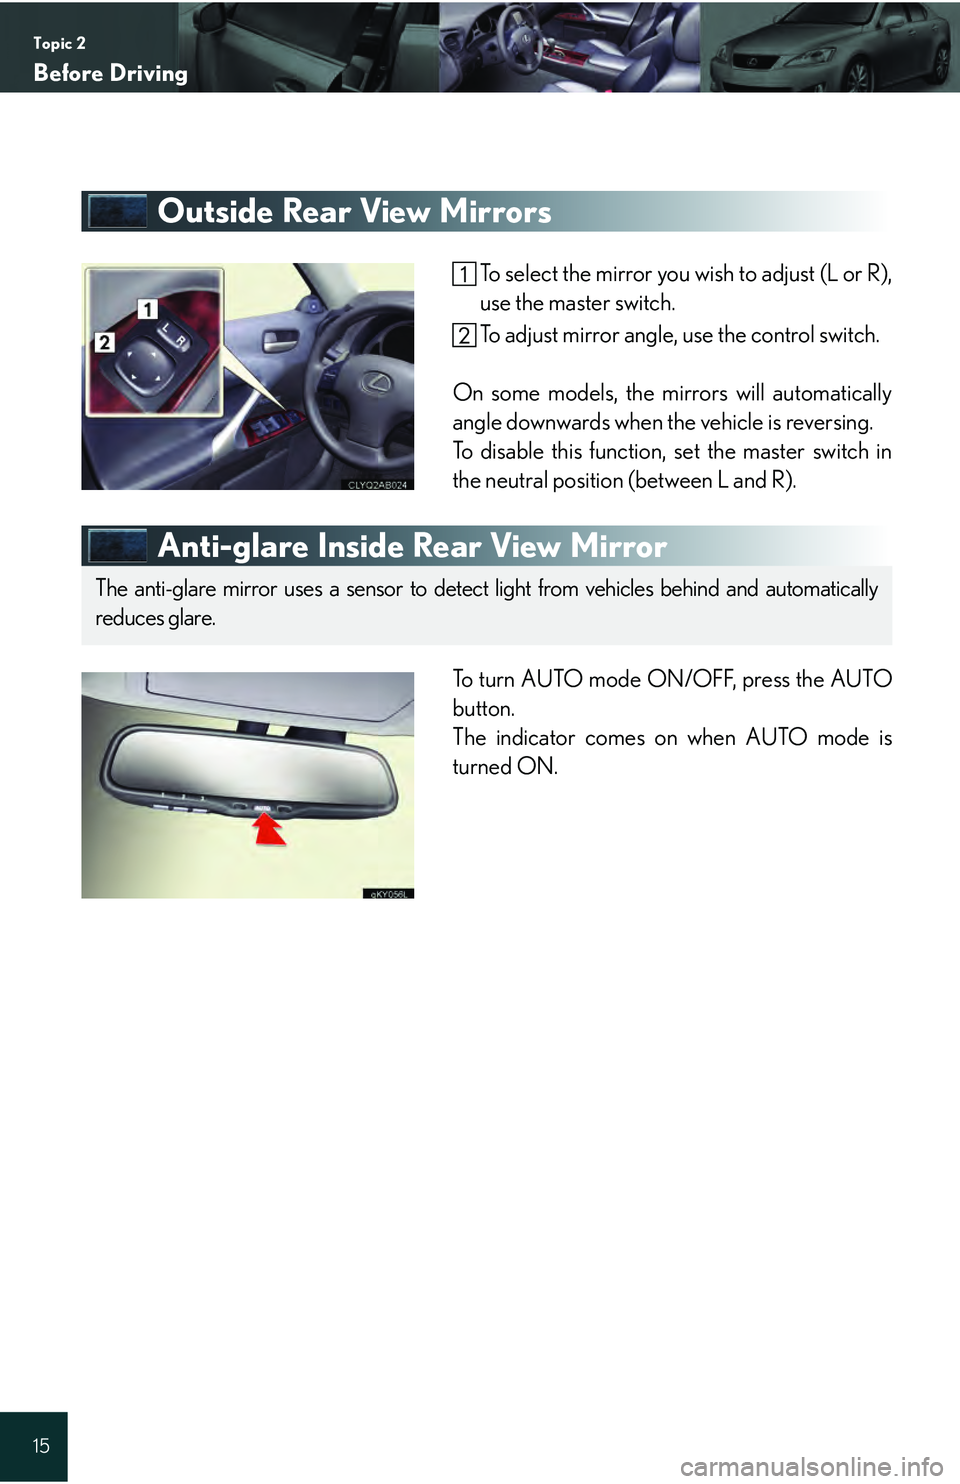 Lexus IS250 2009  Specifications / LEXUS 2009 IS350/250 QUICK GUIDE  (OM53689U) User Guide Topic 2
Before Driving
15
Outside Rear View Mirrors
To select the mirror you wish to adjust (L or R),
use the master switch.
To adjust mirror angle, use the control switch.
On some models, the mirrors